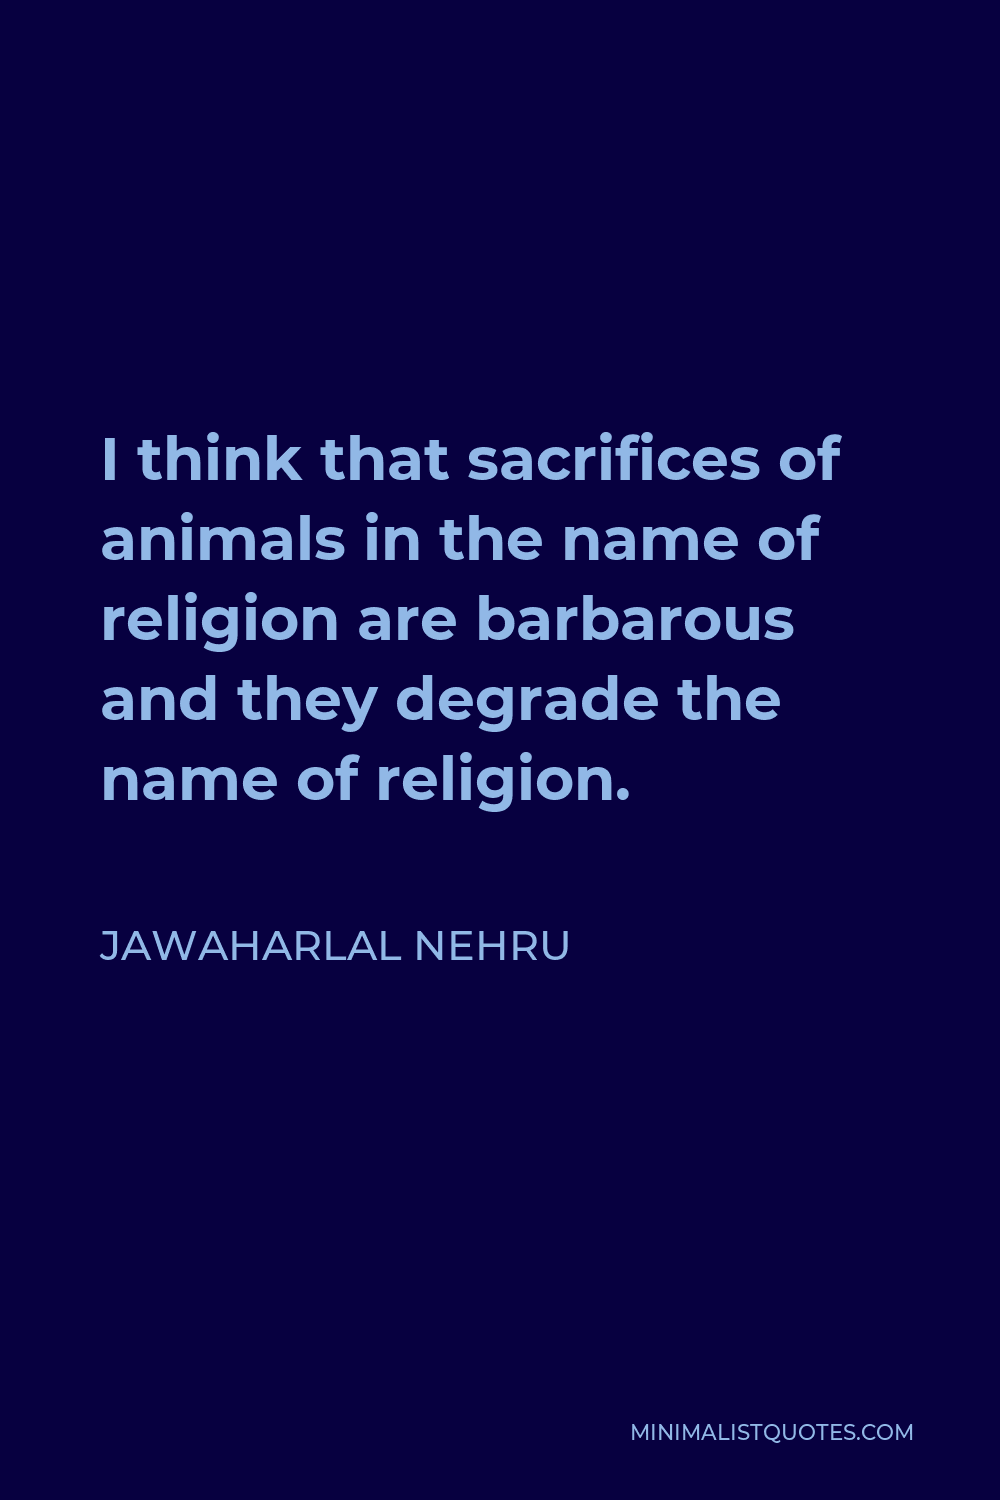 Jawaharlal Nehru Quote - I think that sacrifices of animals in the name of religion are barbarous and they degrade the name of religion.